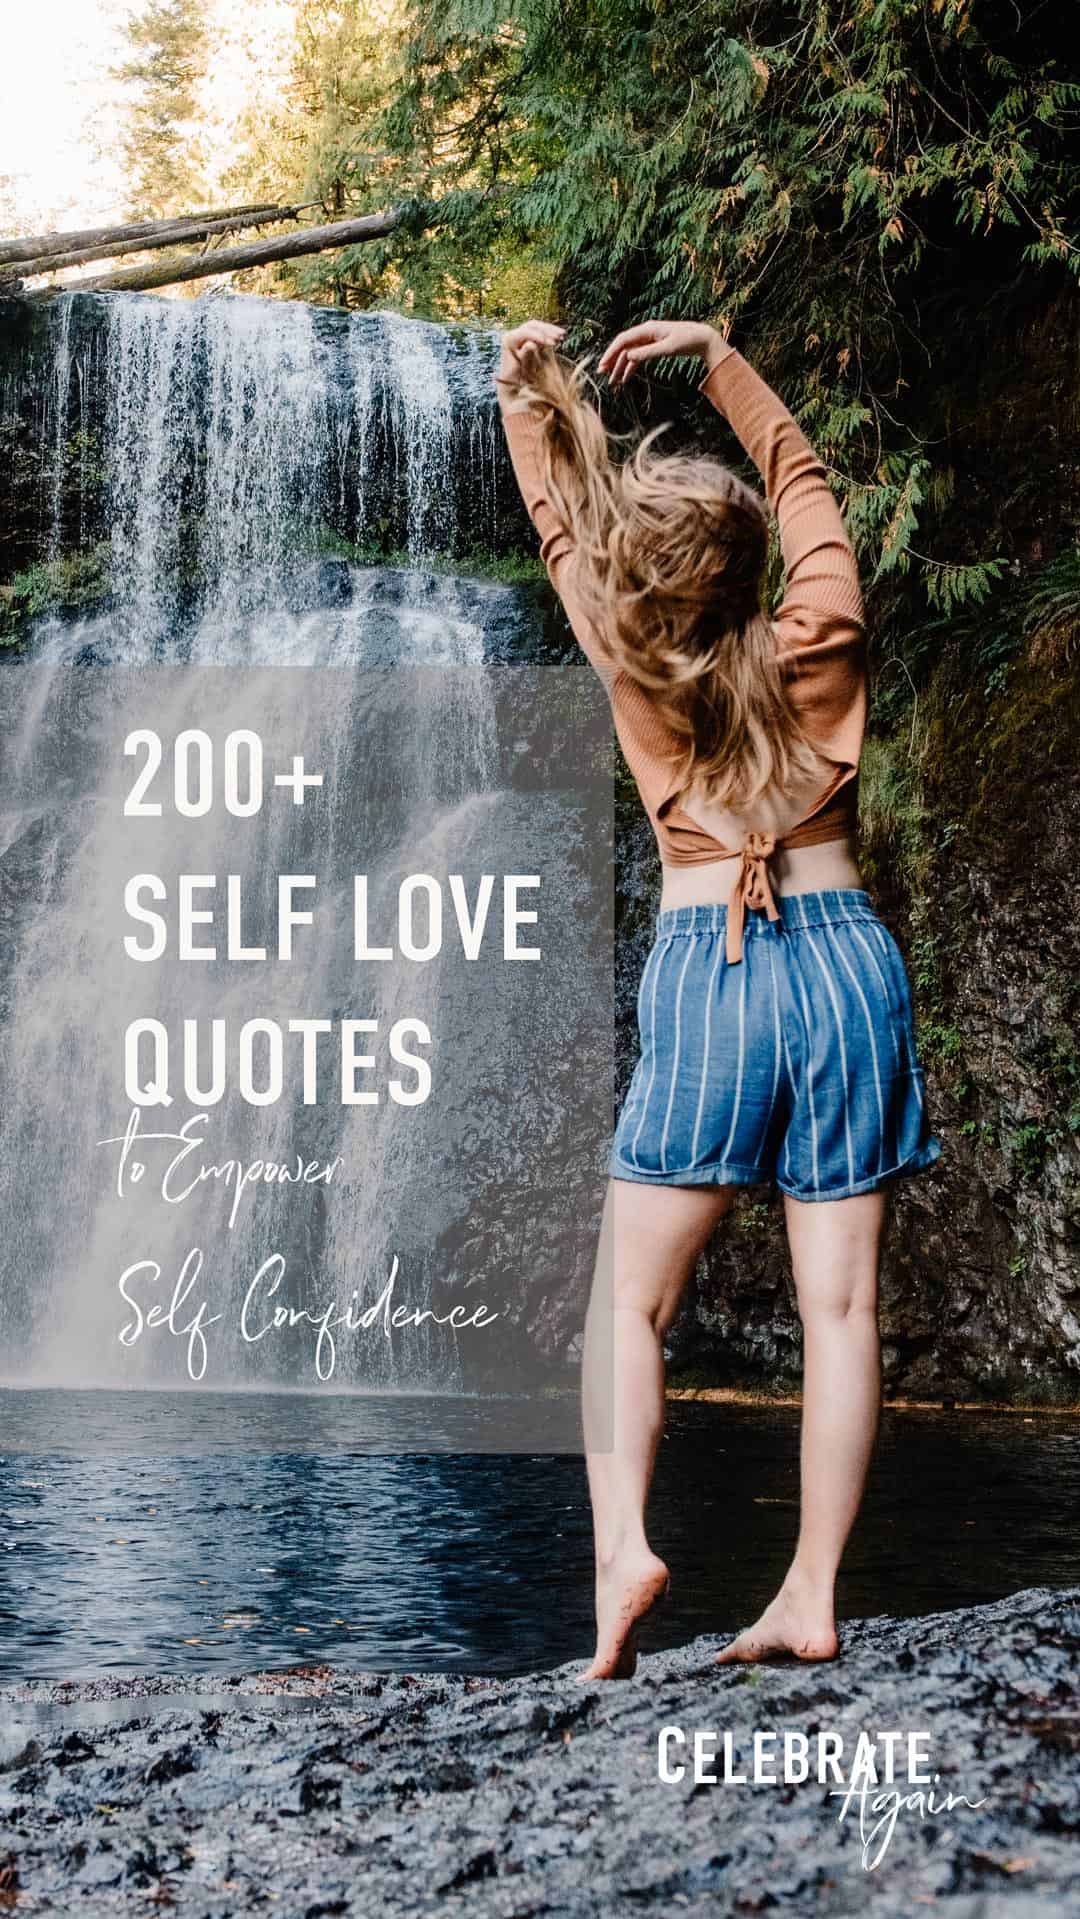 "200+ self love qutoes to empower confidence" female near waterfall with arms up and hair falling down back